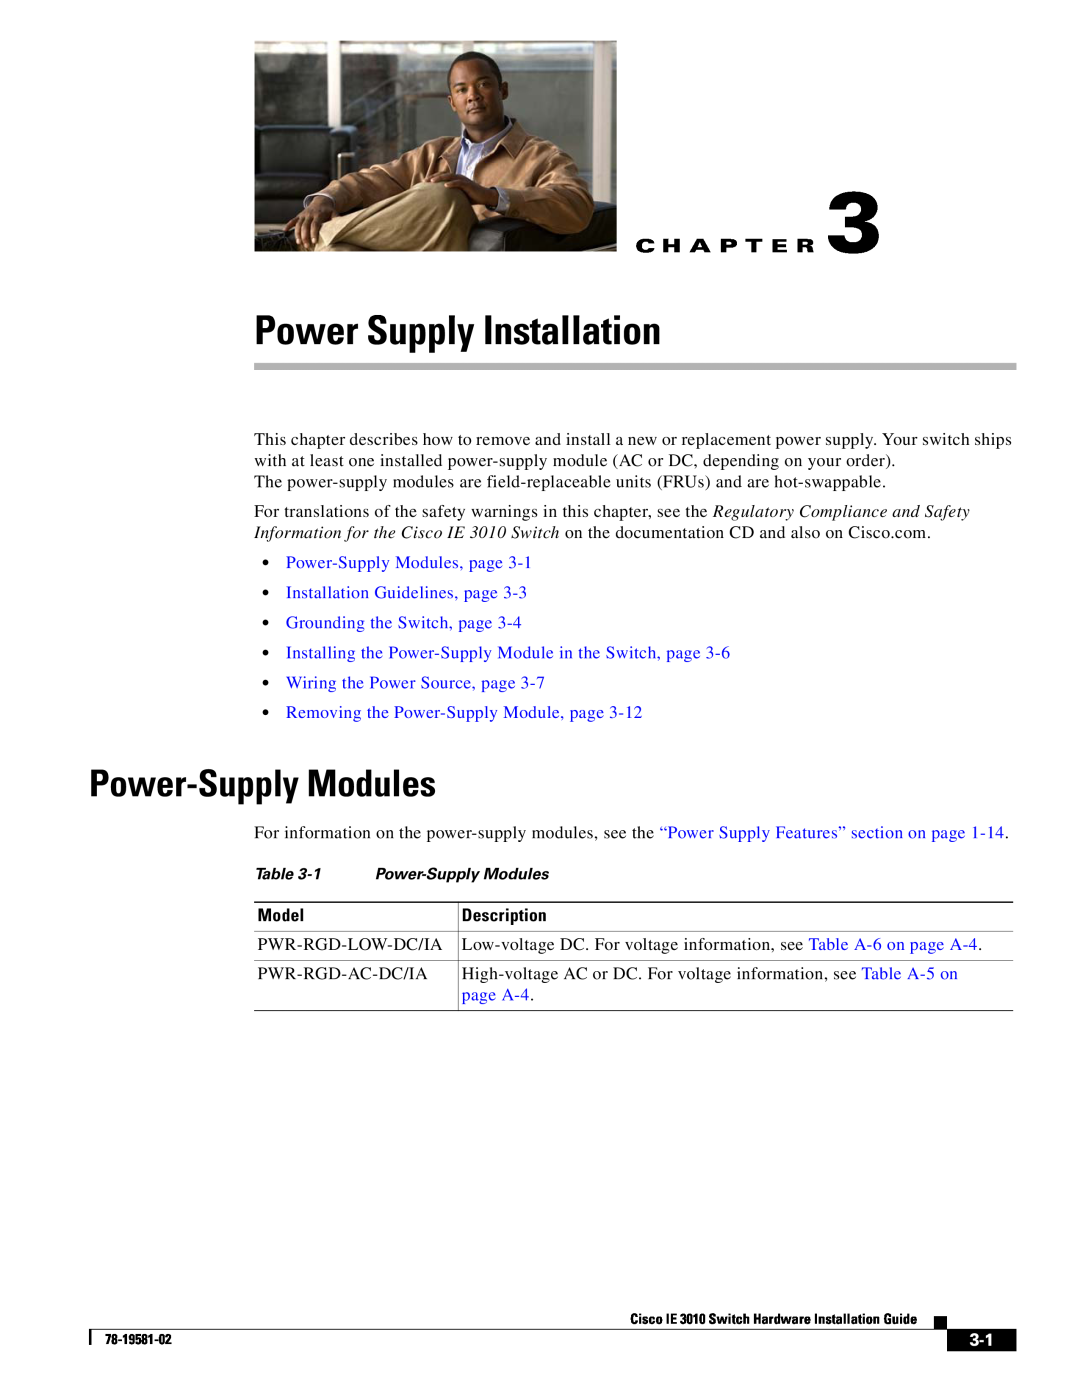 Cisco Systems IE301024TC Power Supply Installation, Power-Supply Modules, Grounding the Switch, page, Pwr-Rgd-Low-Dc/Ia 